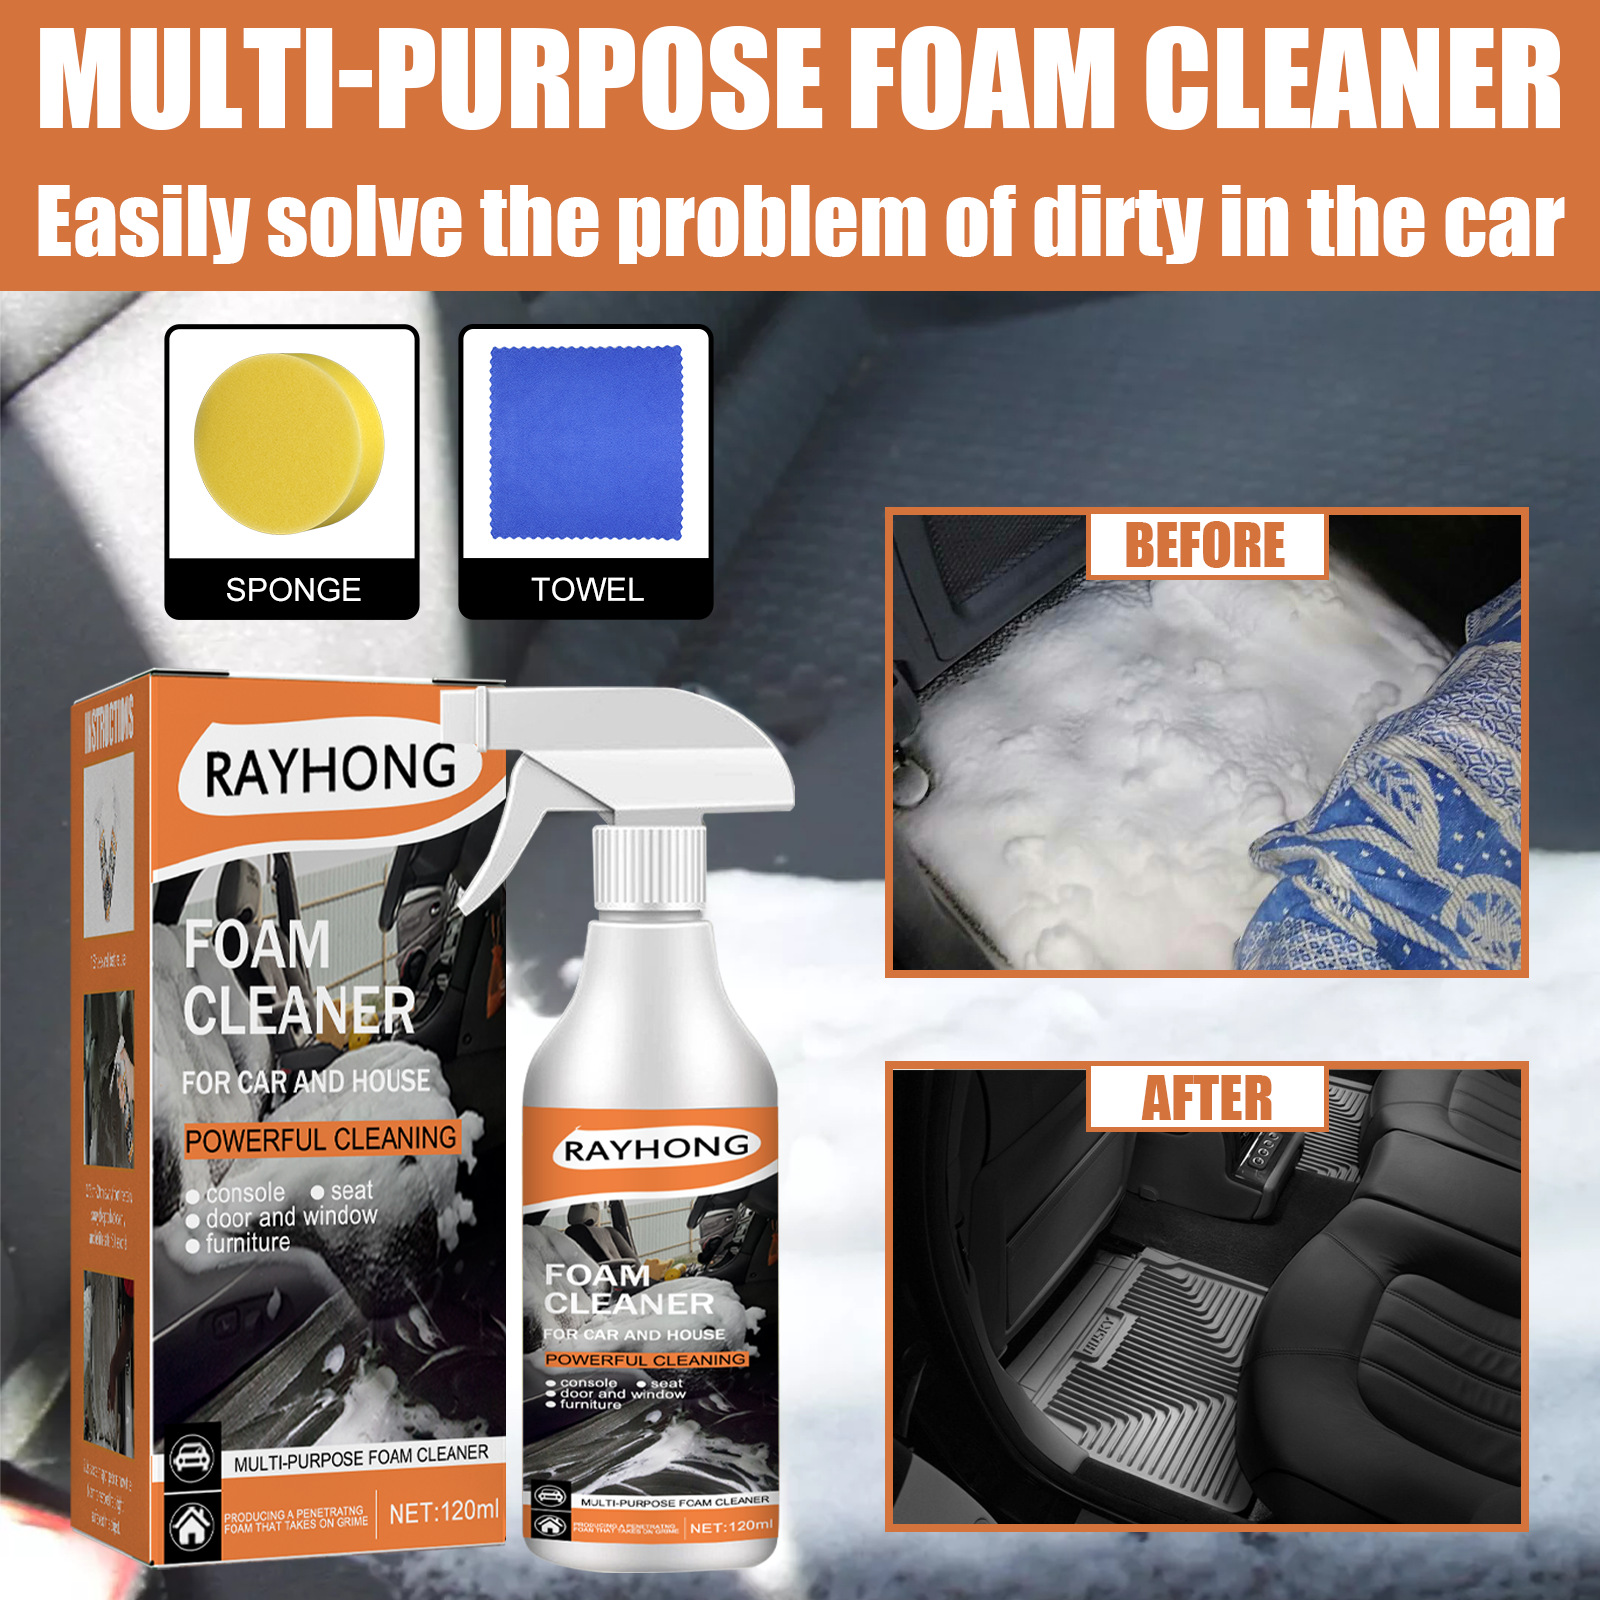 Multifunctional Car Foam Cleaner Spray - 00ml Strong Foam Cleaning Artifact  for Car Engines Steering Wheels Dashboards Door Panels - All-Purpose